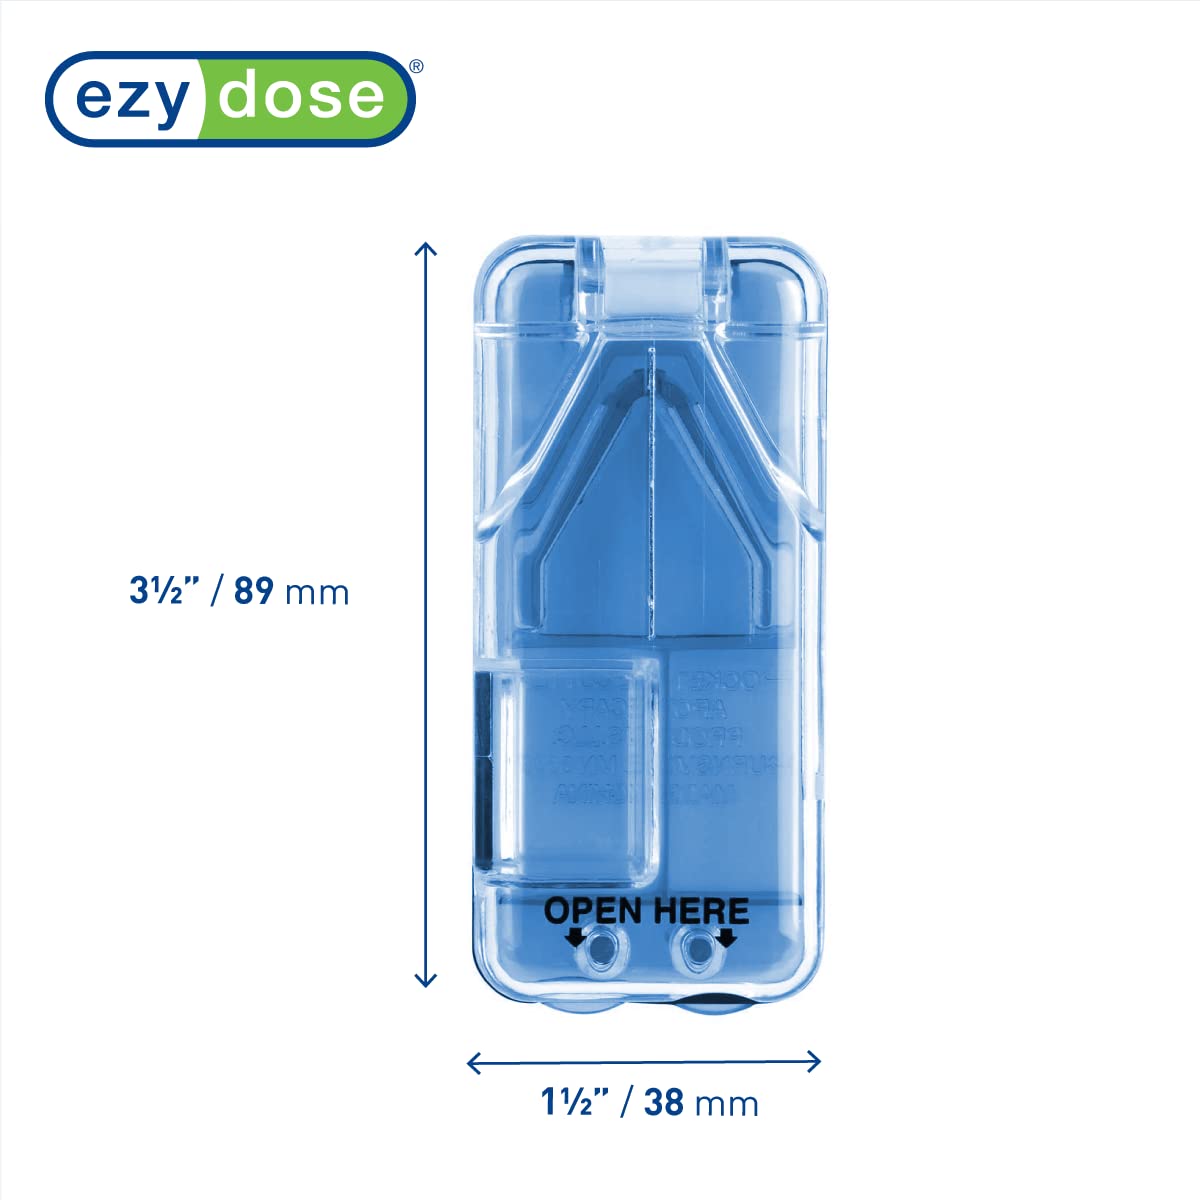 EZY DOSE Pill Cutter and Splitter with Dispenser, Cuts Pills, Vitamins, Tablets, Stainless Steel Blade, Travel Sized, Blue